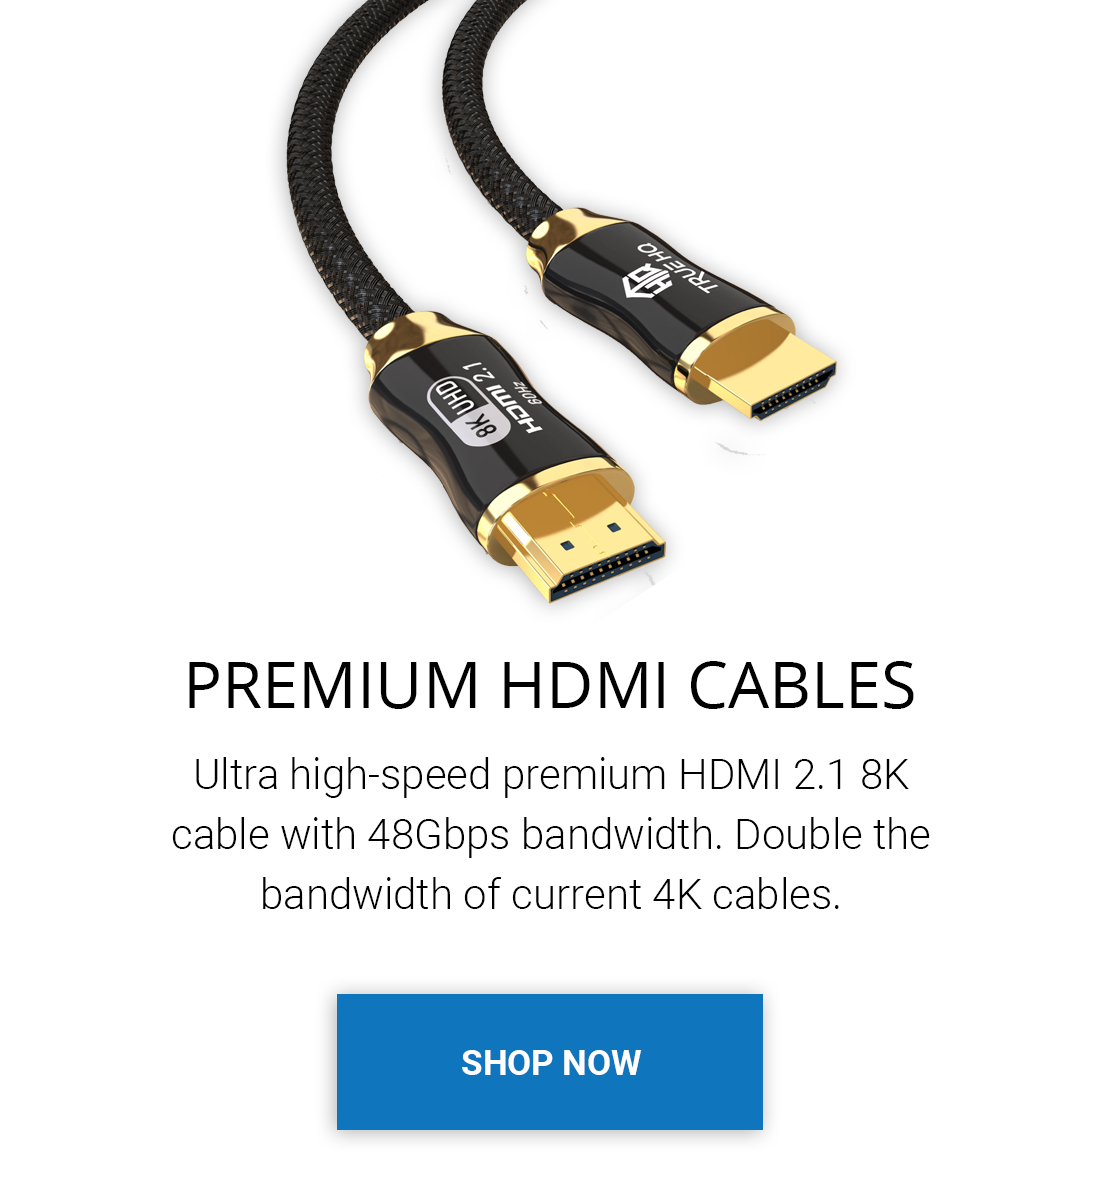 Buy premium hdmi cables 4k hdr. Ultra High Speed HDMI 2.1 Cable 48Gbps. Best quality. Dynamic HDR, 8K, 4K, Certified, OLED TV, Sky, Virgin, braided jacket. Free UK Shipping 